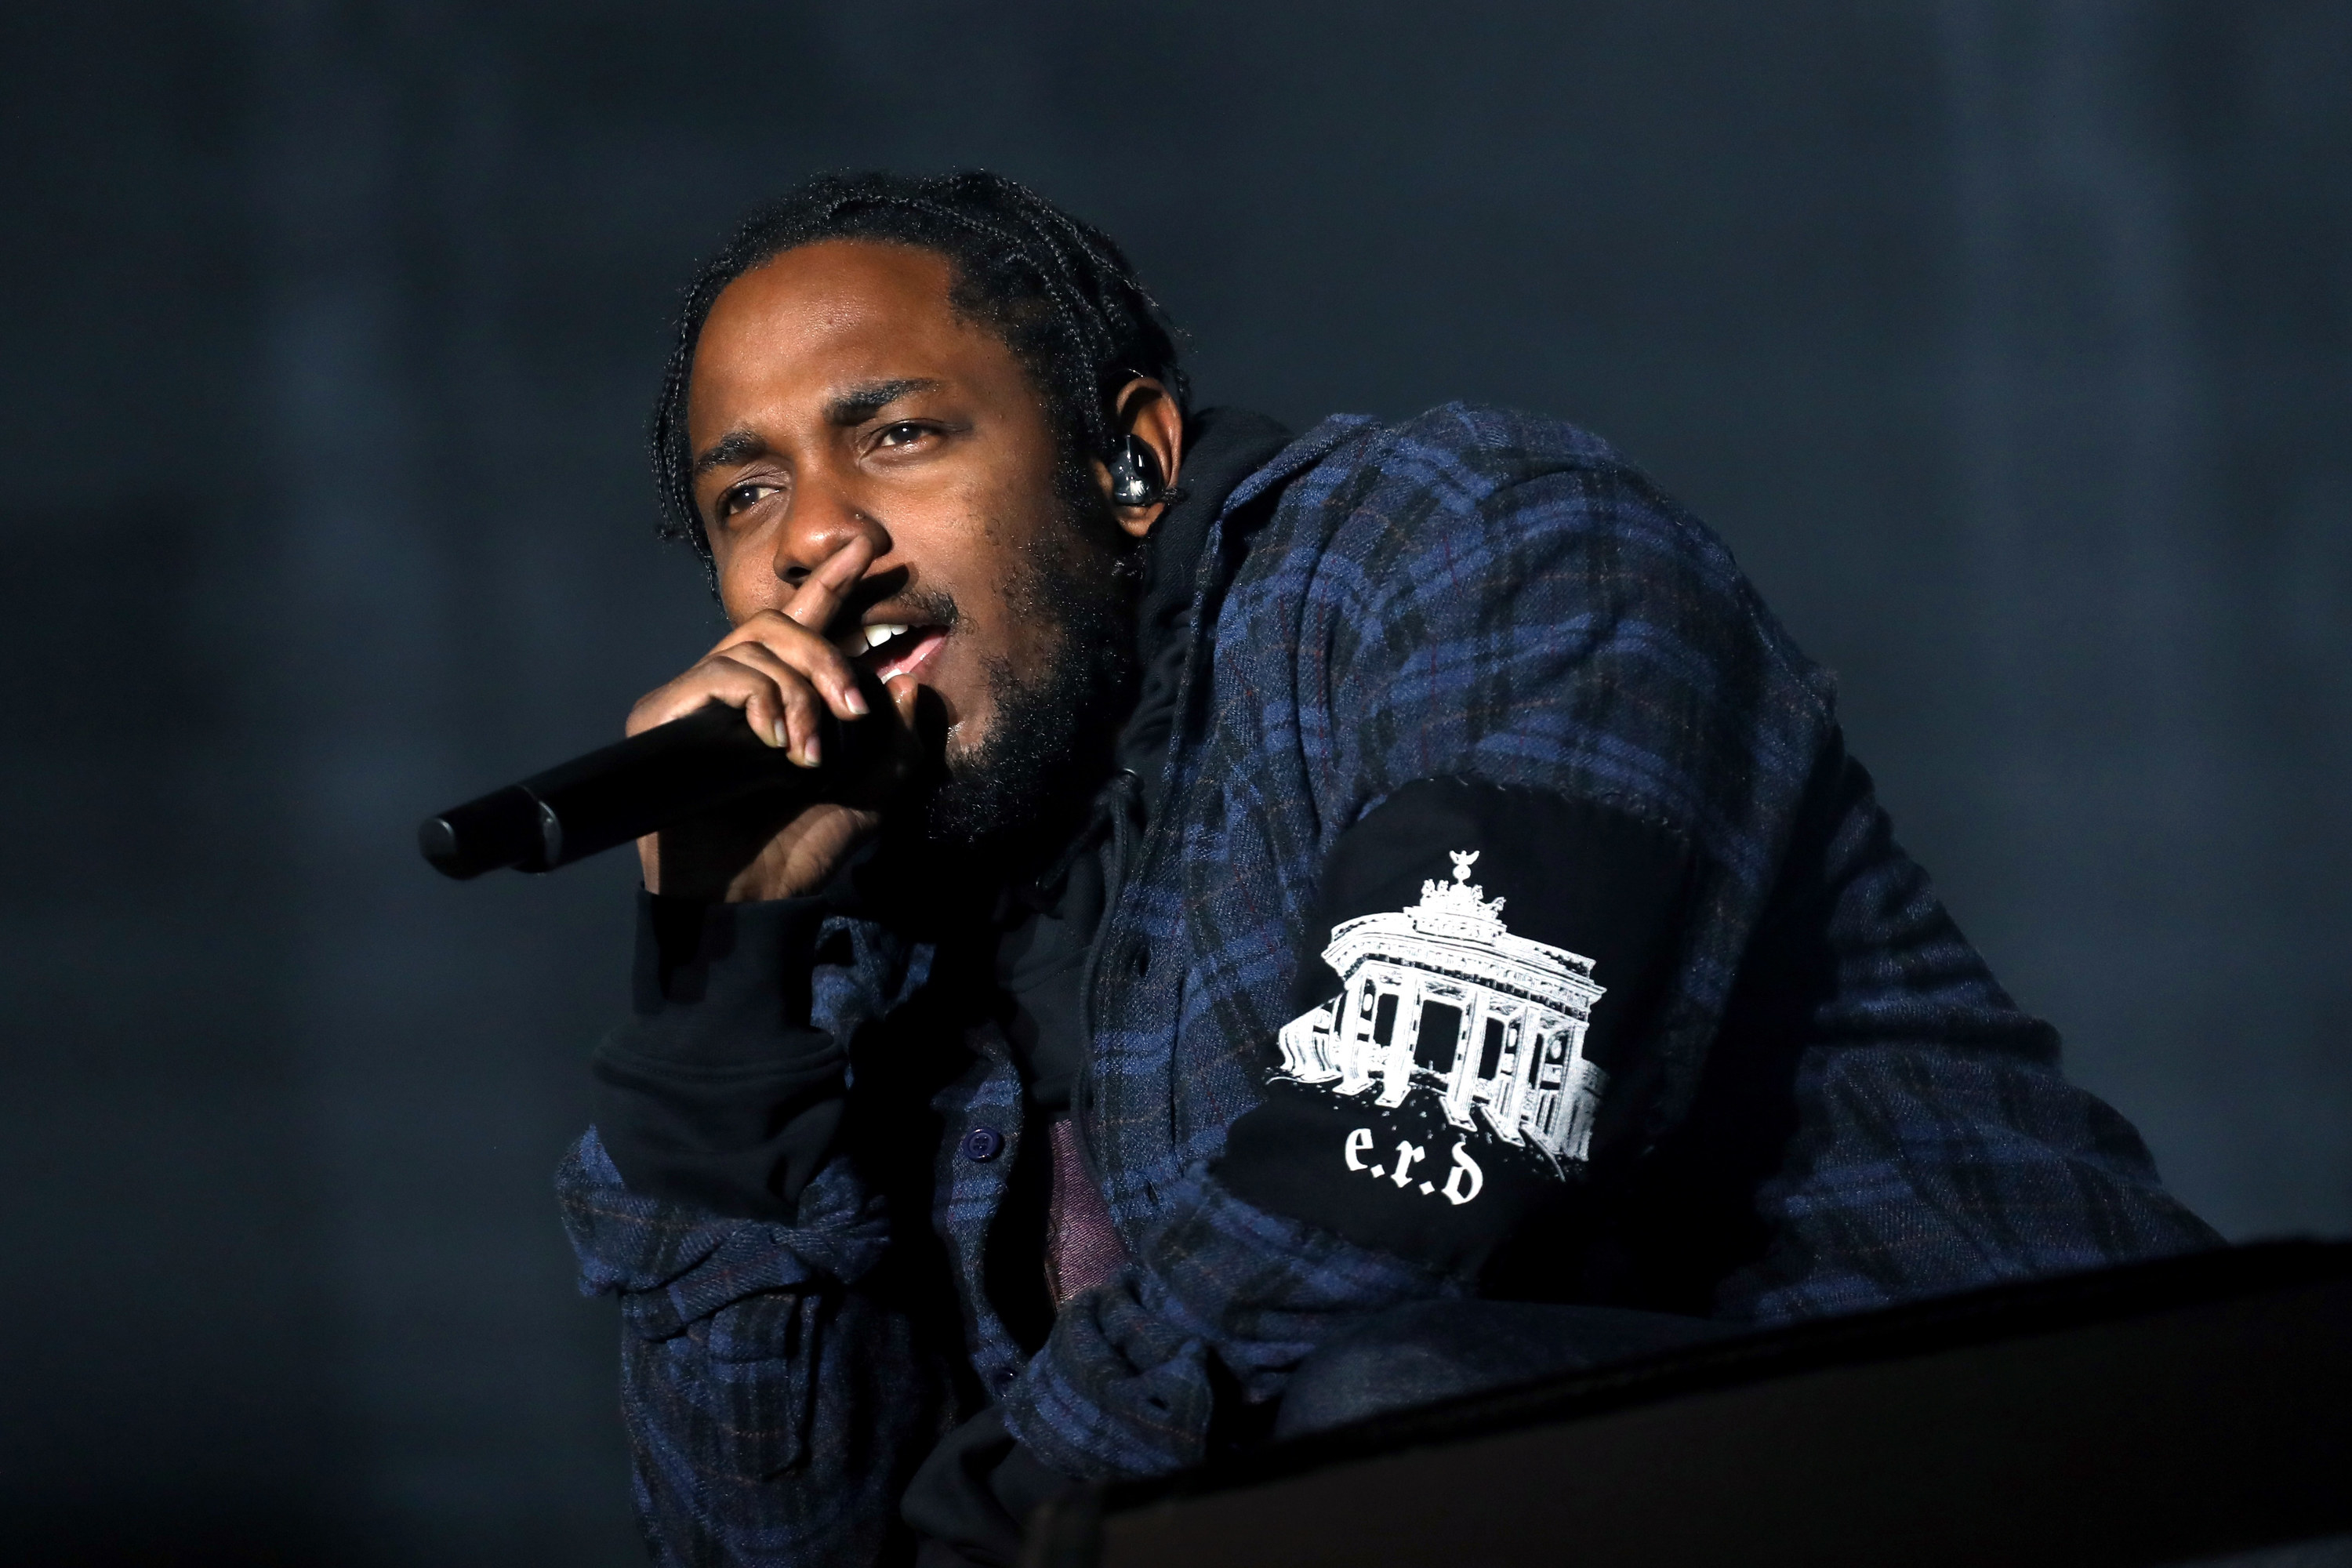 Kendrick Lamar leans on a ledge while singing into a microphone